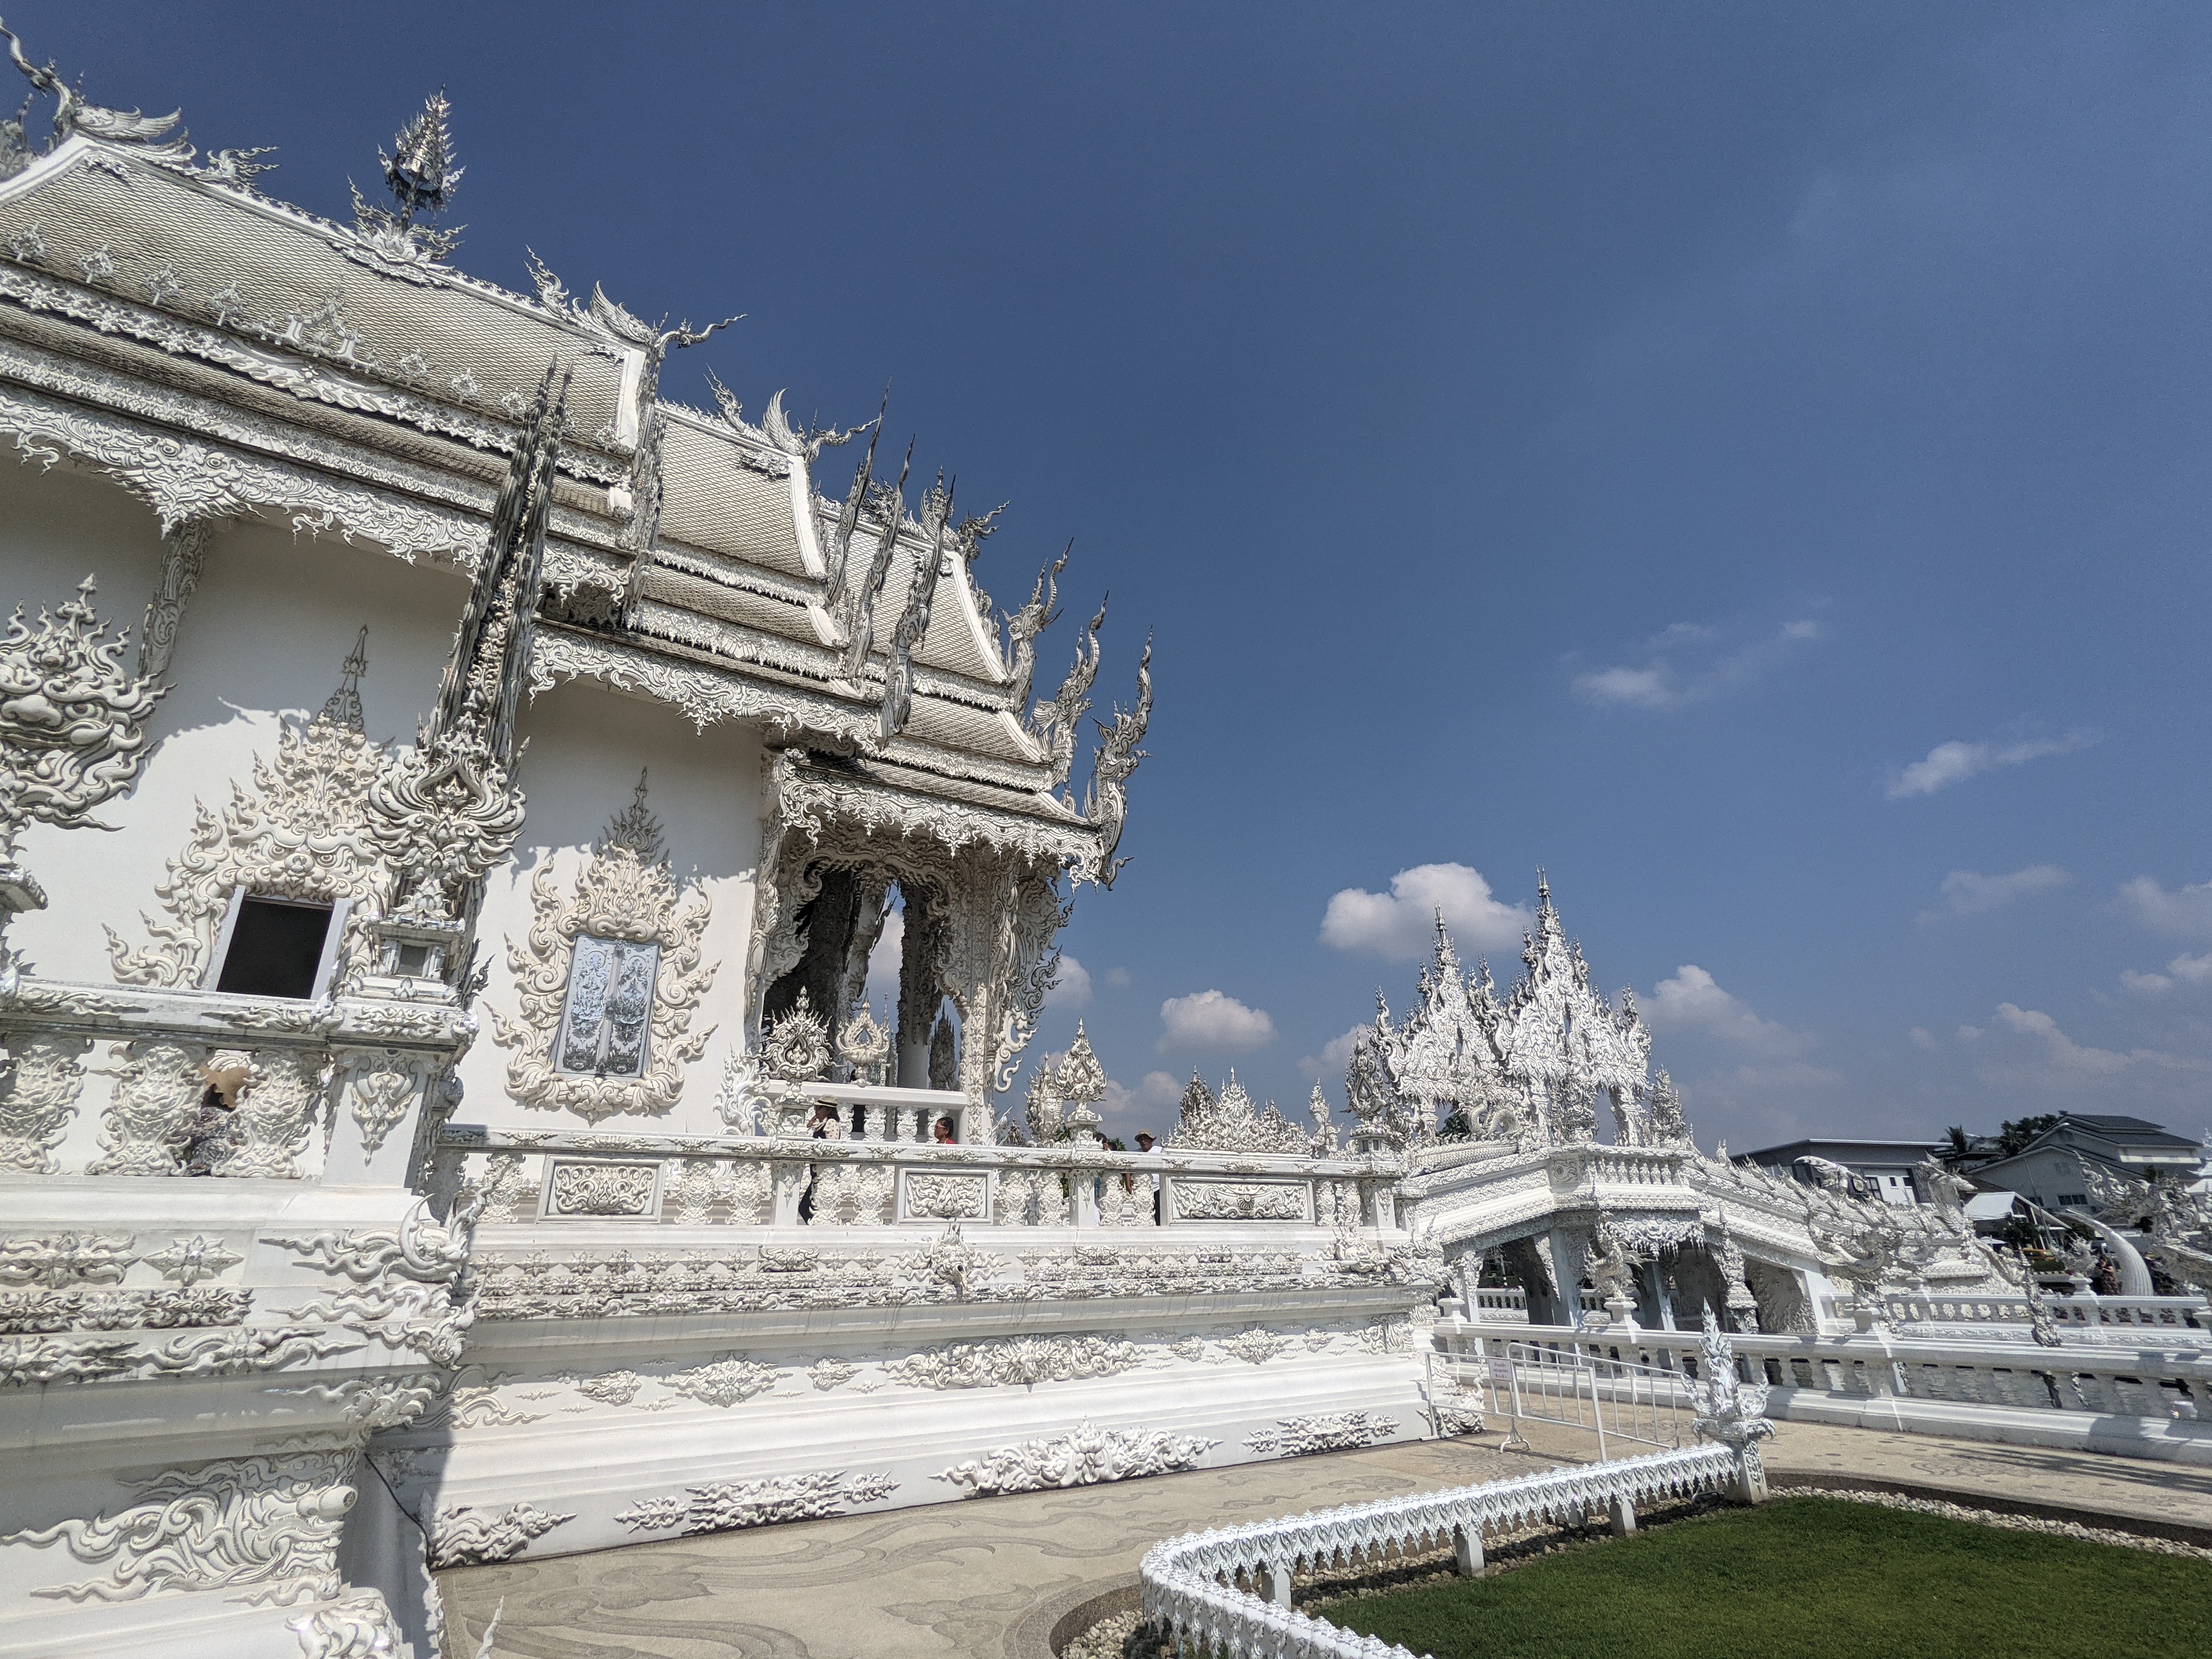 The architecture of Wat Rong Khun is extremely intricate.